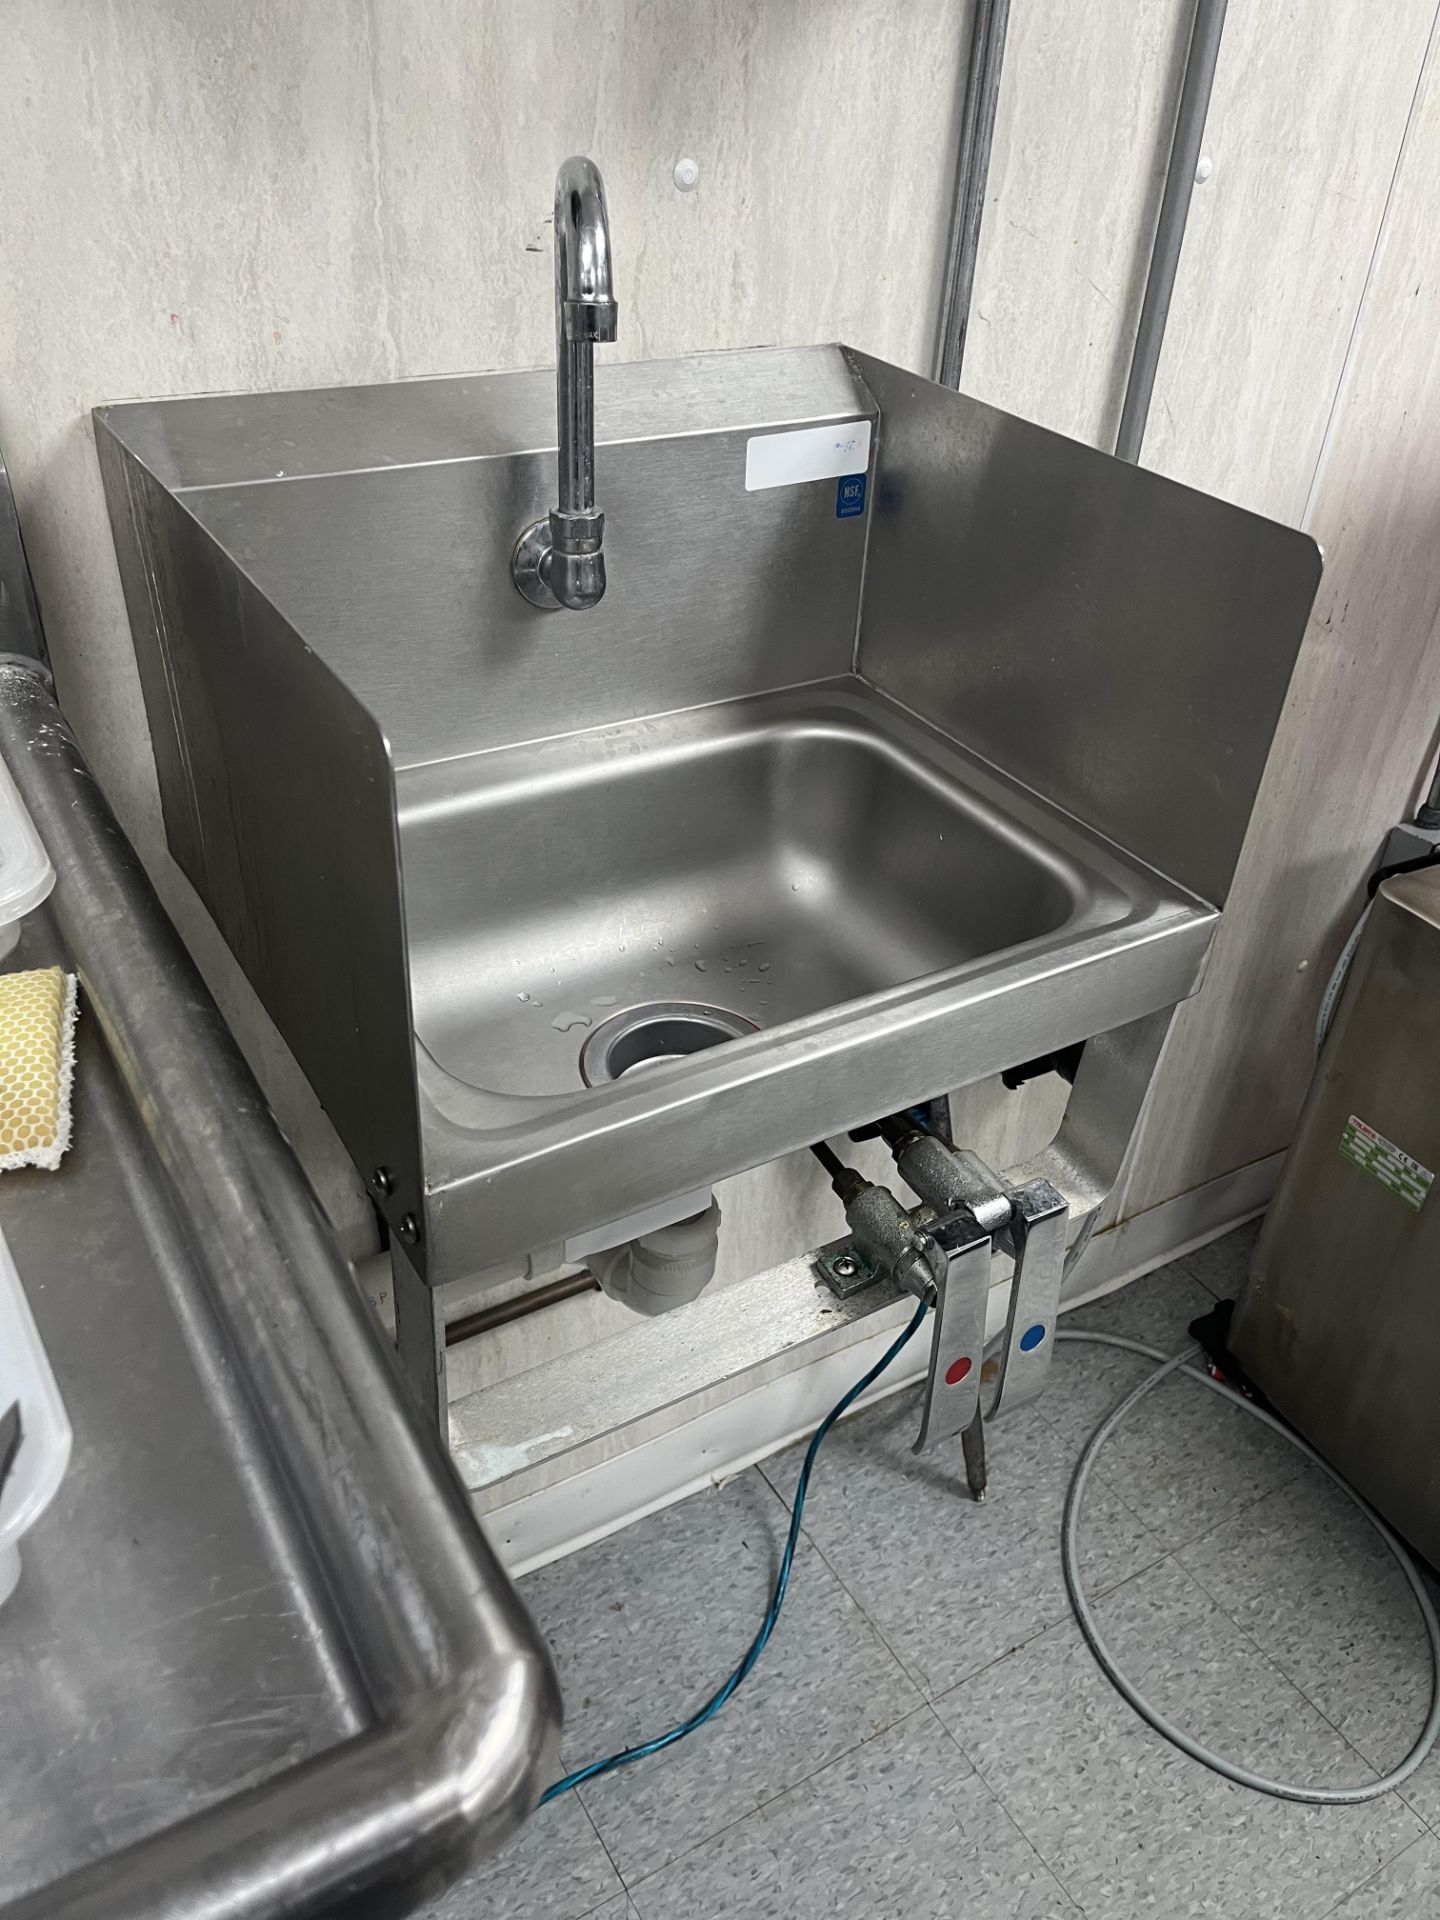 ONE BOWL STAINLESS STEEL SINK MODEL:NSFD032054 DIMS APPROX 48" L 29" W 40" H - Image 2 of 2